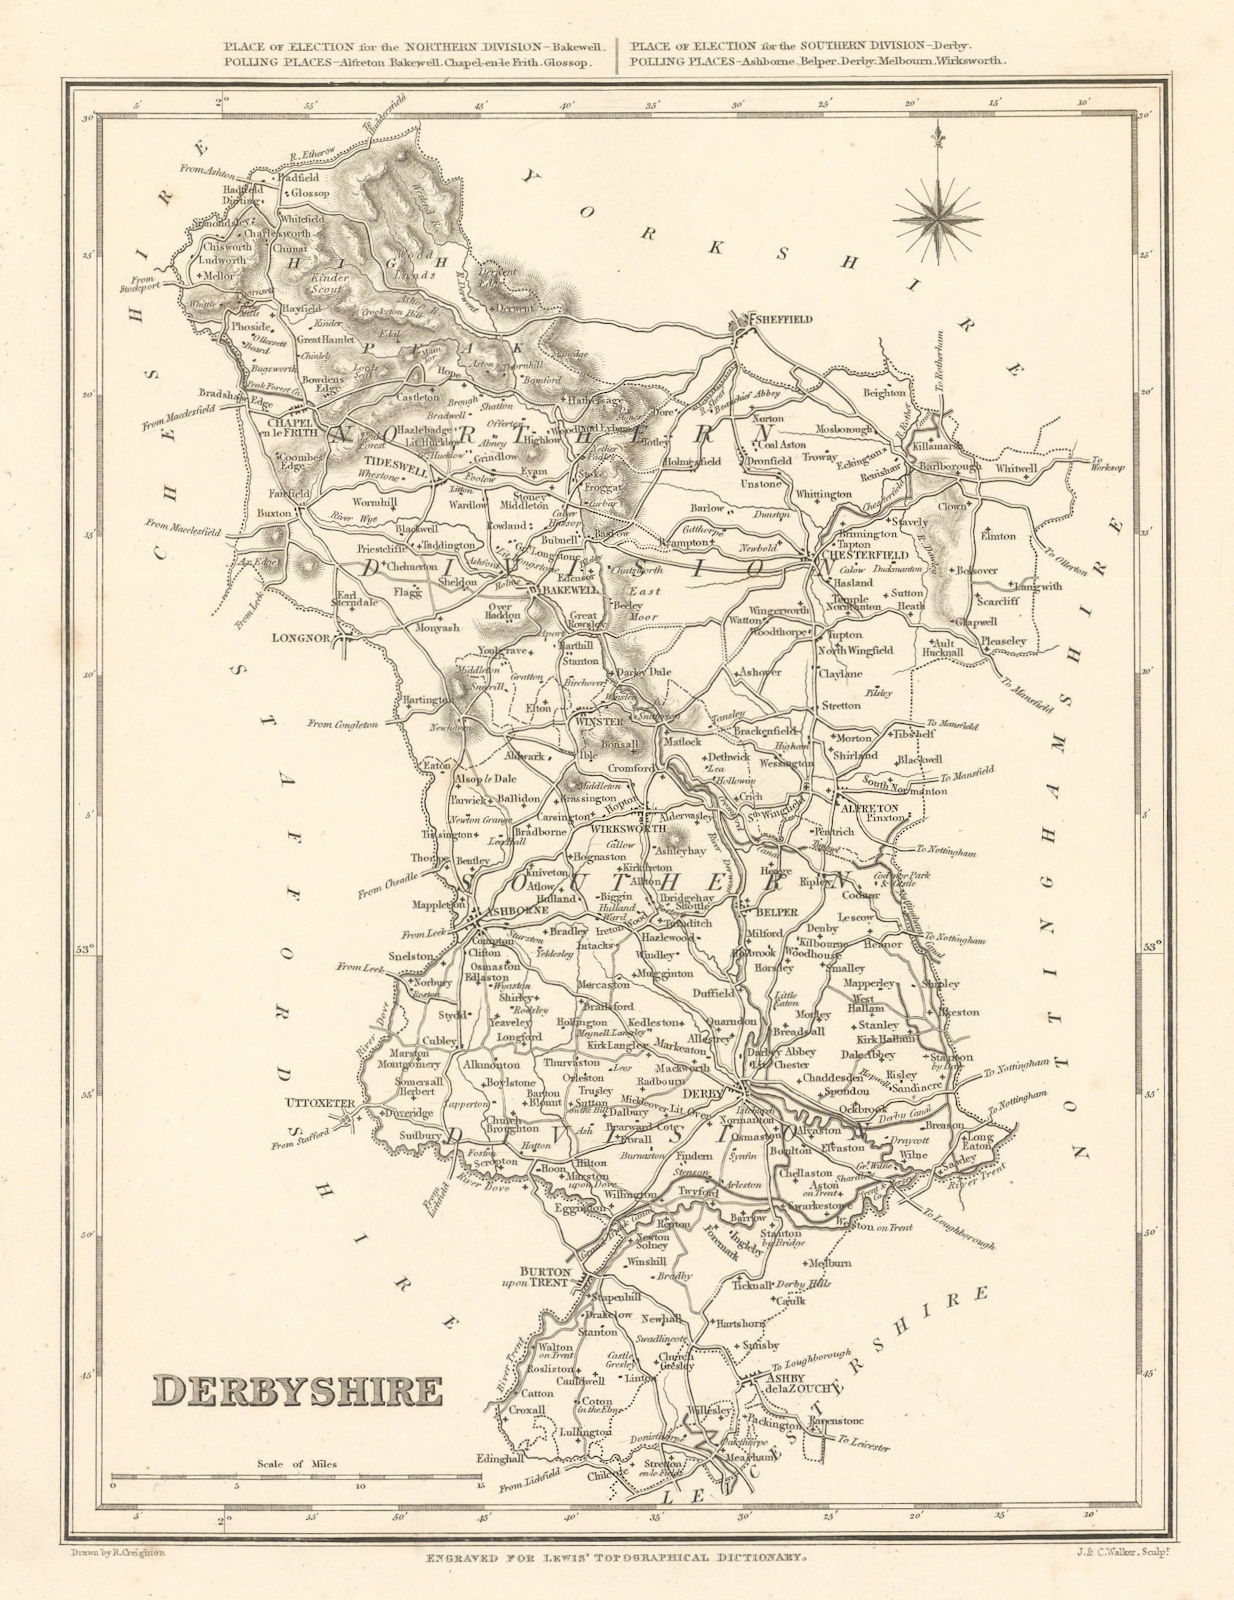 Associate Product Antique county map of DERBYSHIRE by Walker & Creighton for Lewis c1840 old